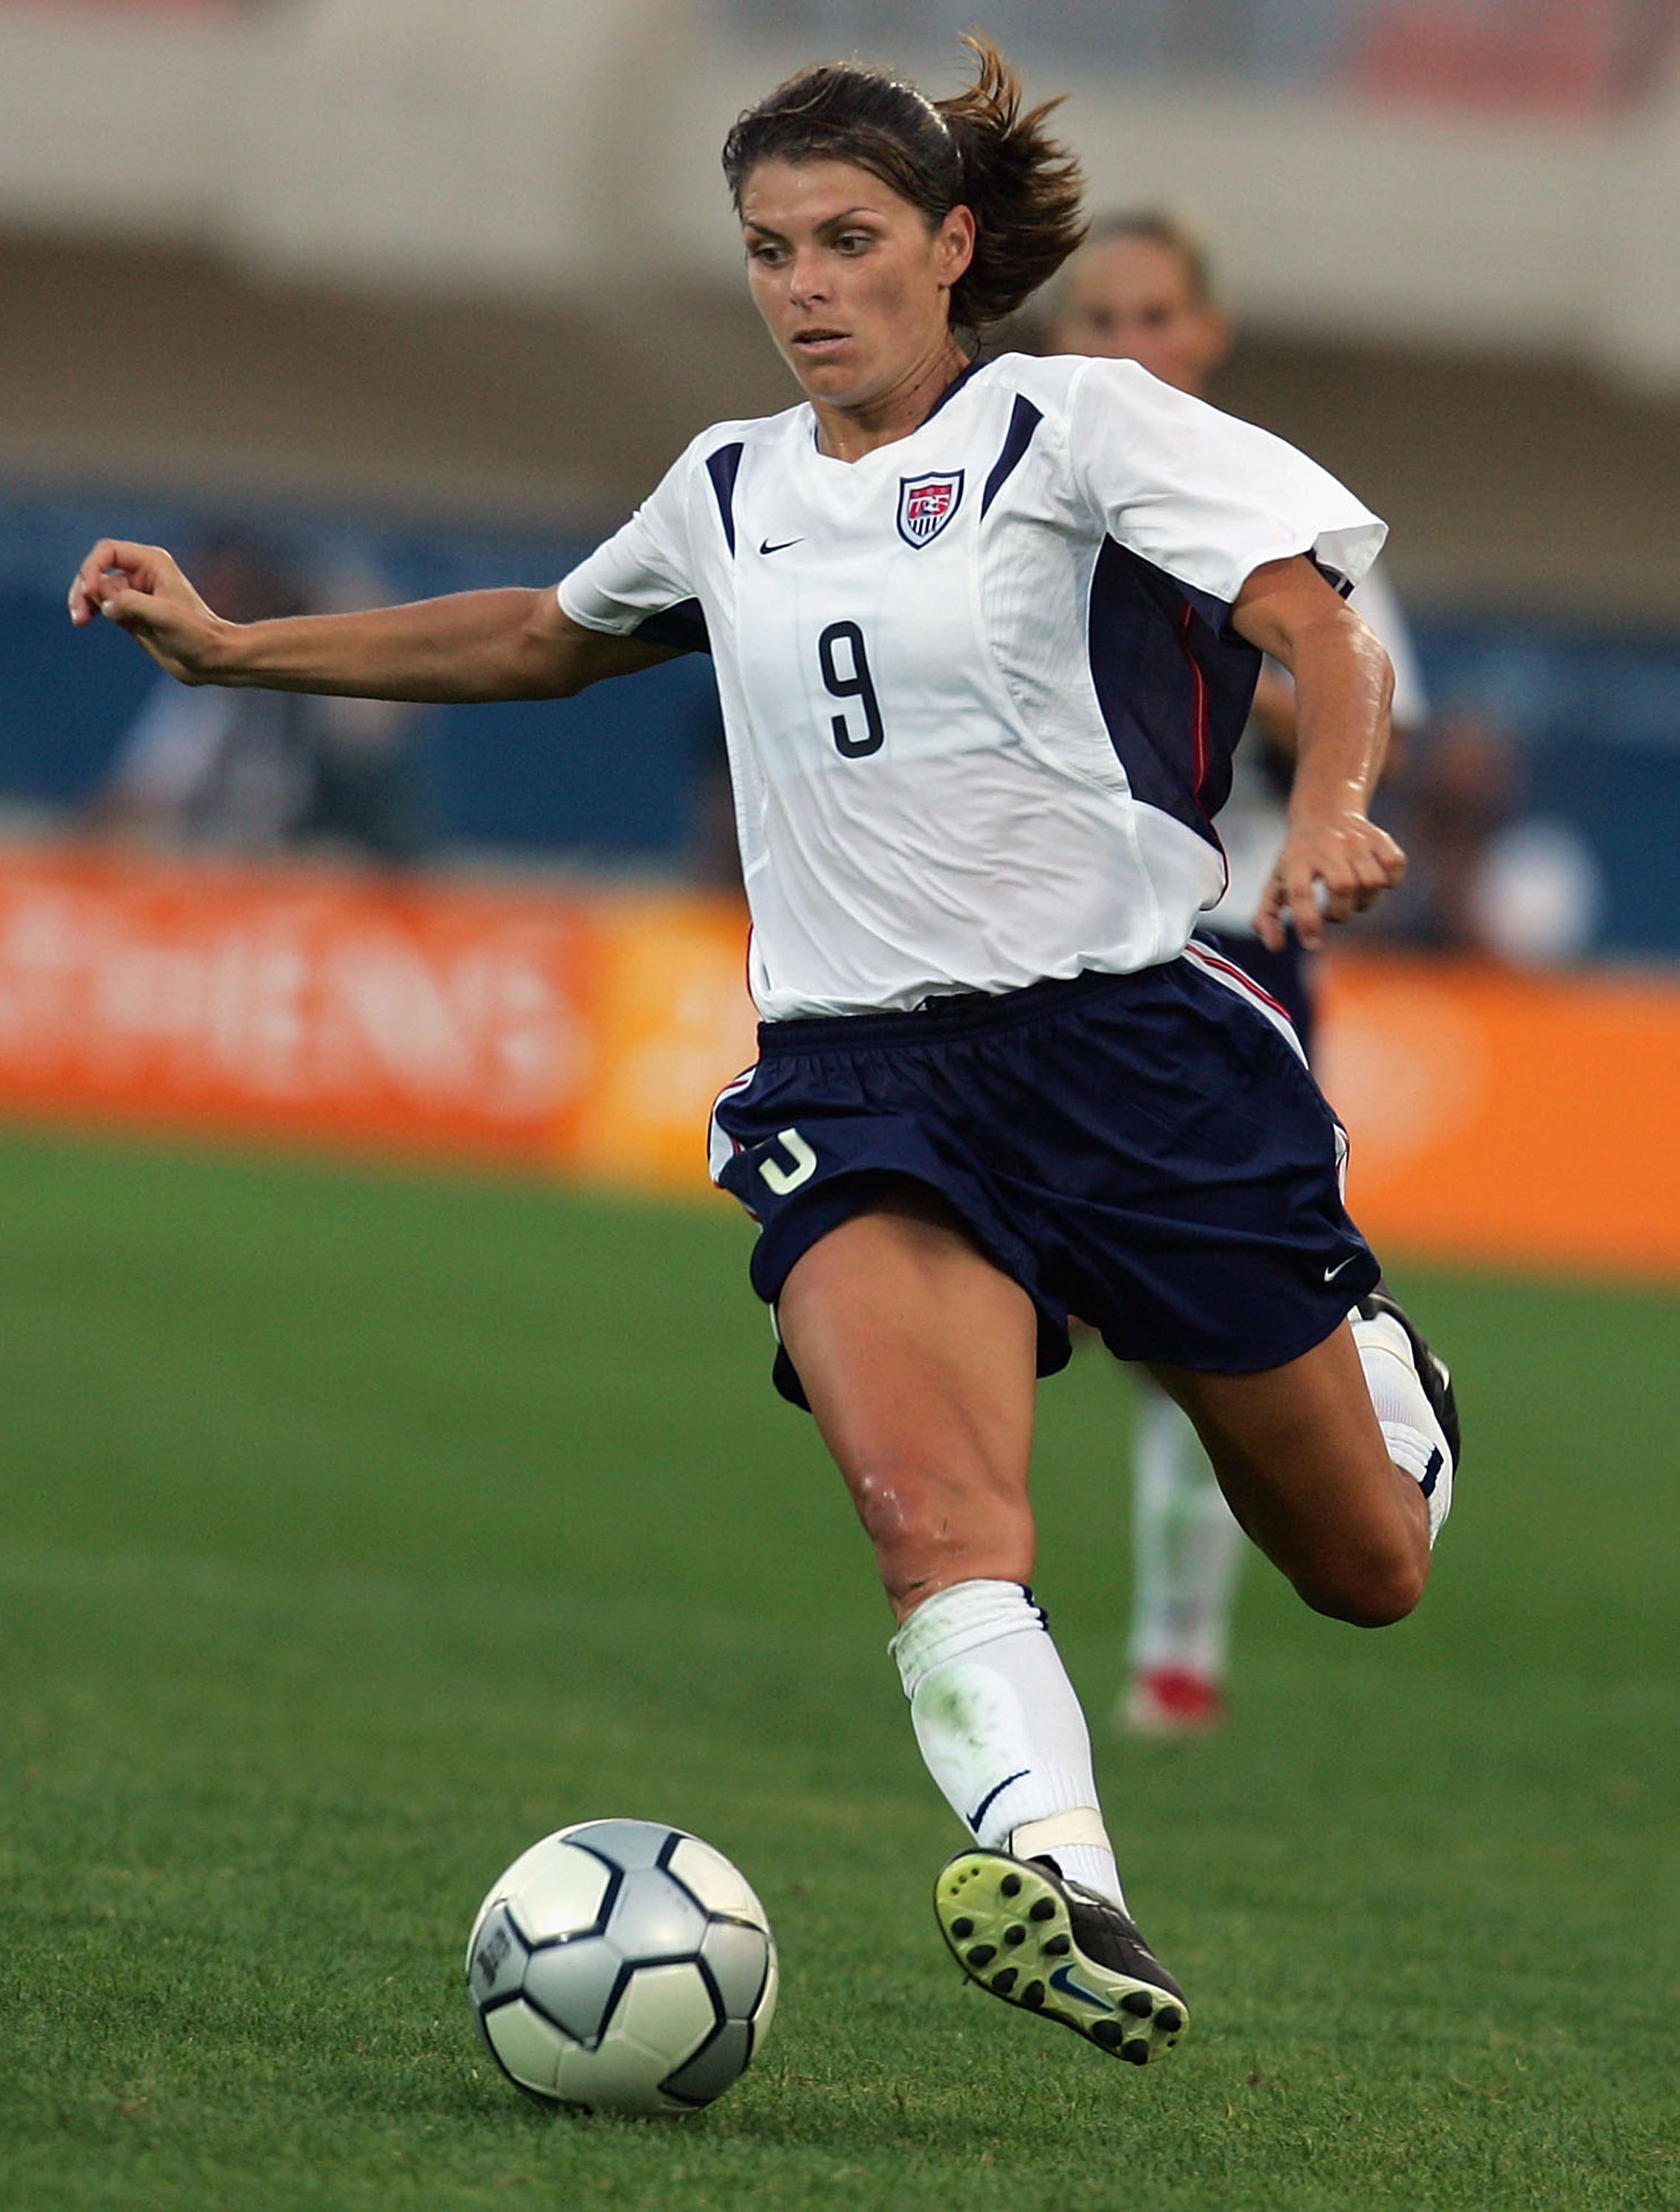 Mia Hamm #9 of the United States dribbles during the women's soccer semifinal match between USA and Germany on August 23, 2004 during the Athens 2004 Summer Olympic Games at Pankritio Stadium in Heraklio, Greece. (Scott Barbour&mdash;Getty Images)